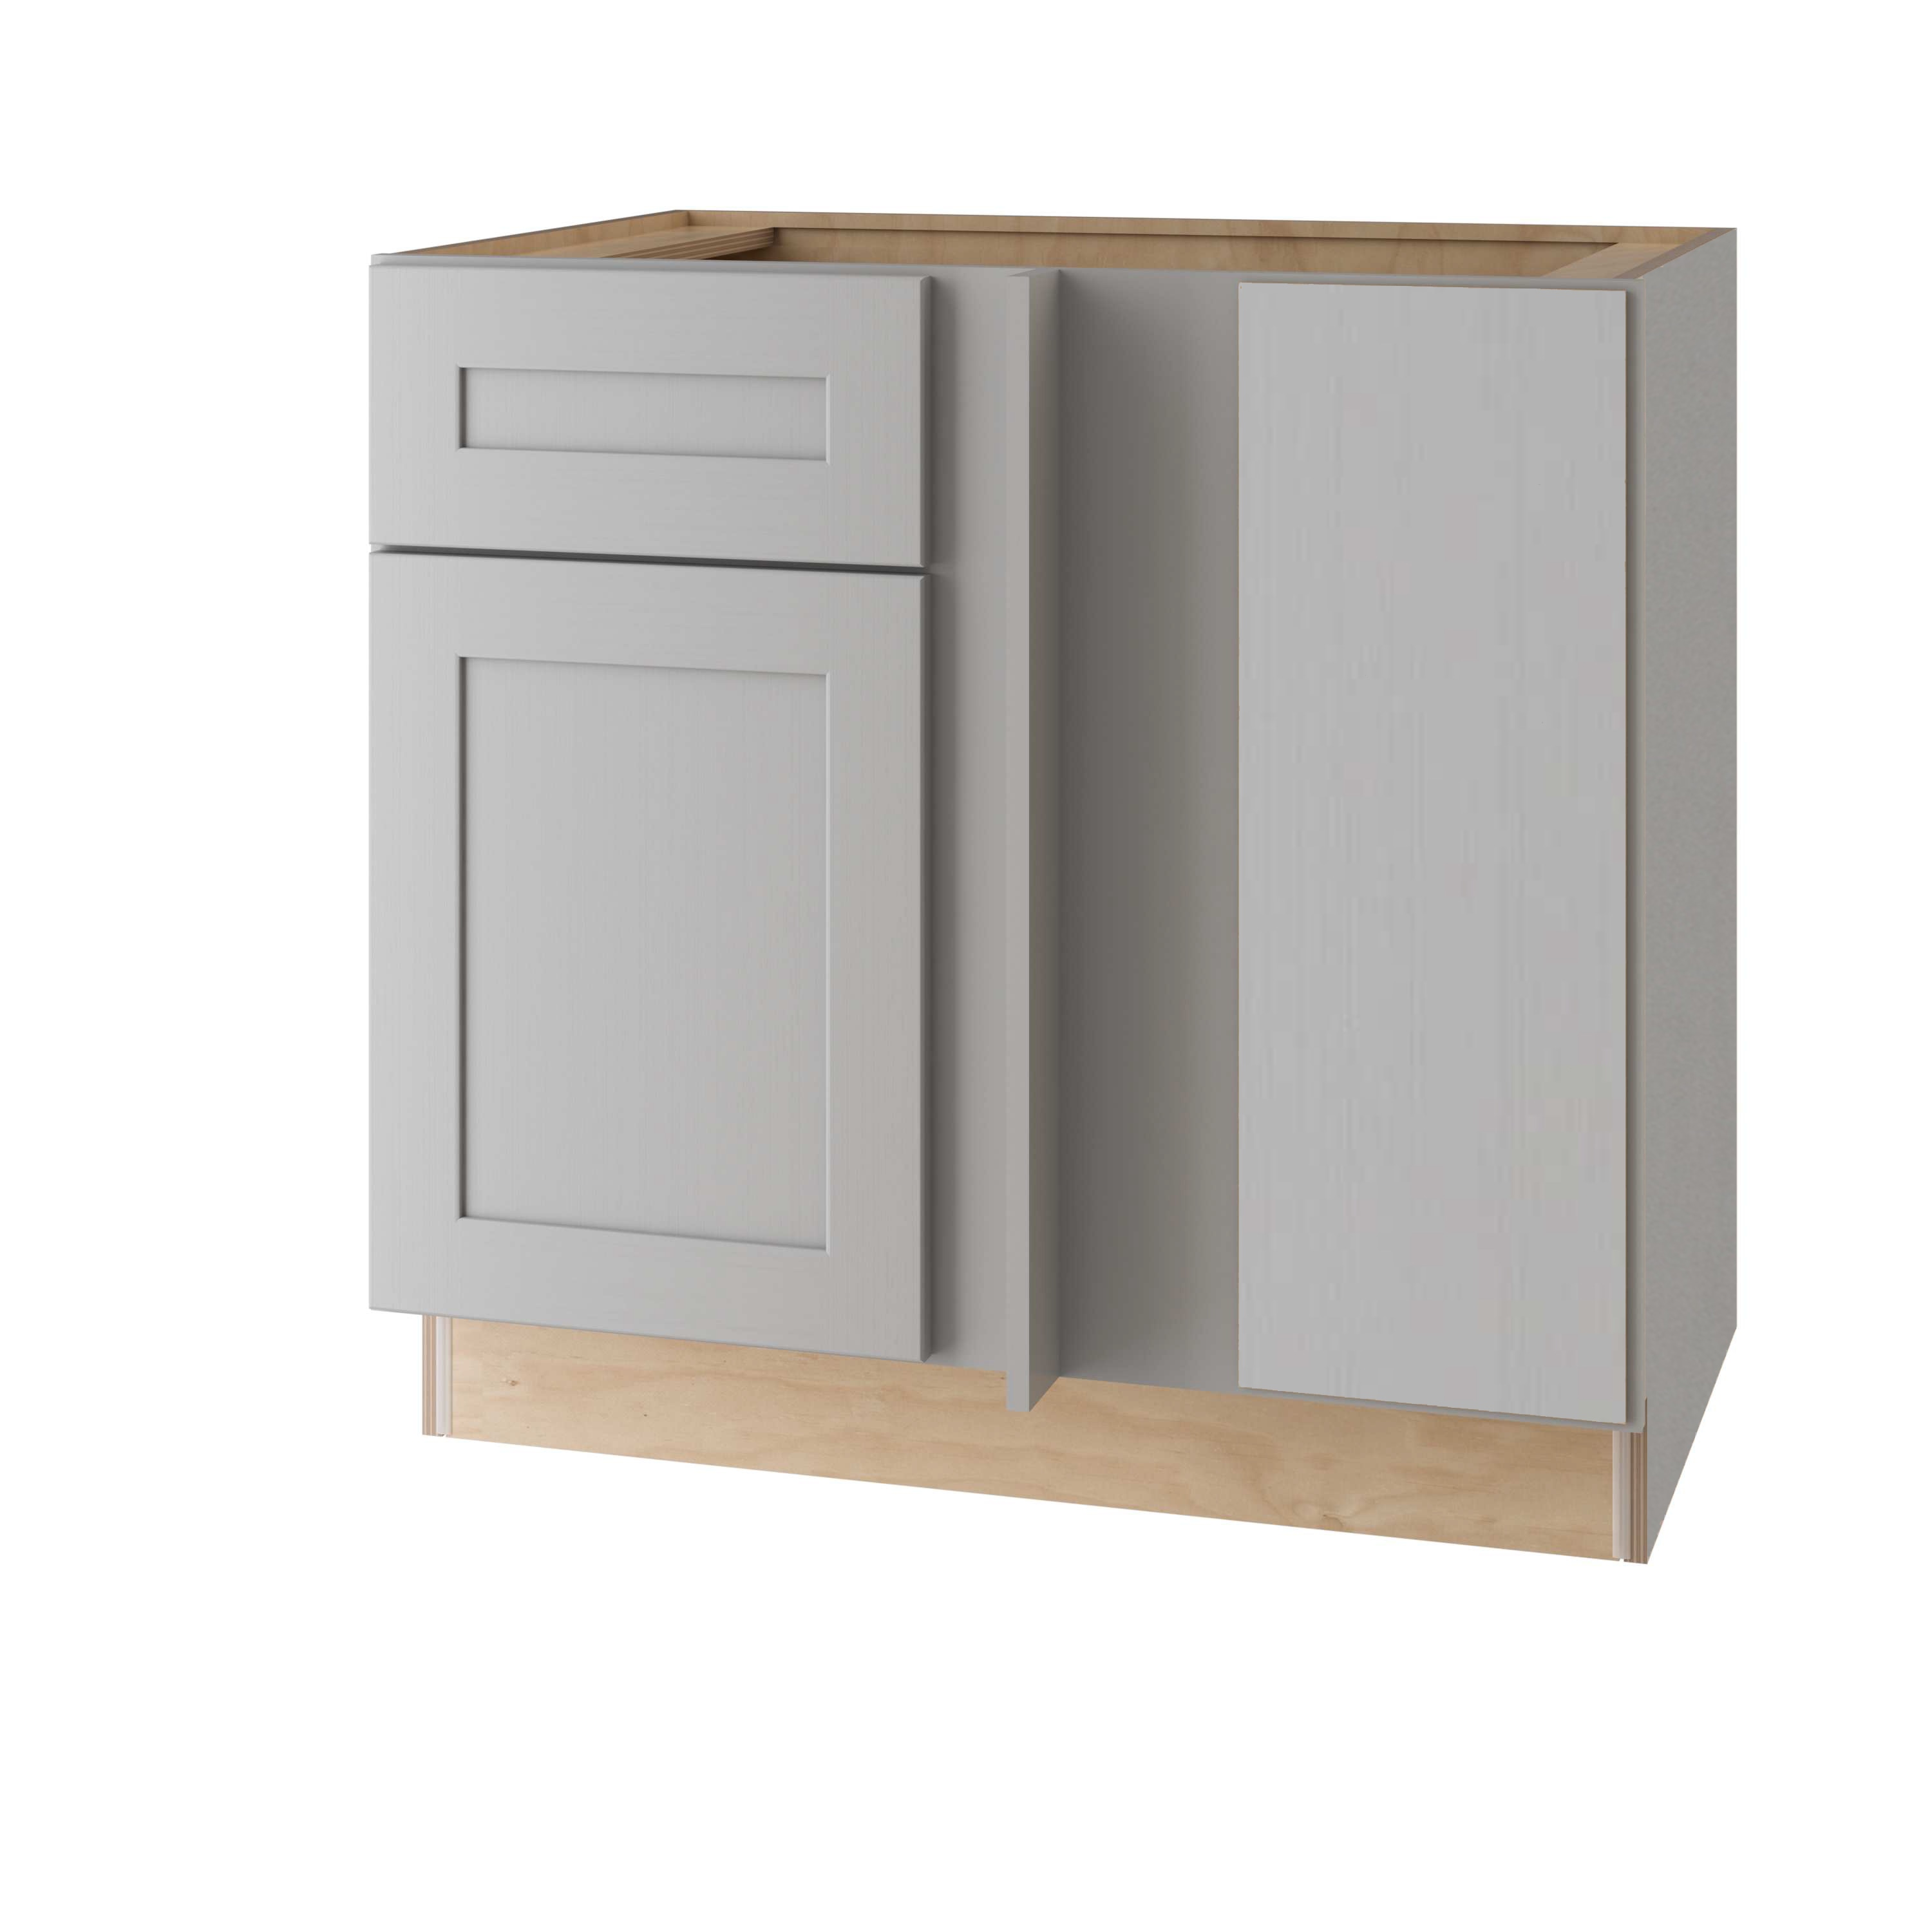 Luxxe Cabinetry Thornbury 36-in W x 34.5-in H x 24-in D Pastel Gray ...